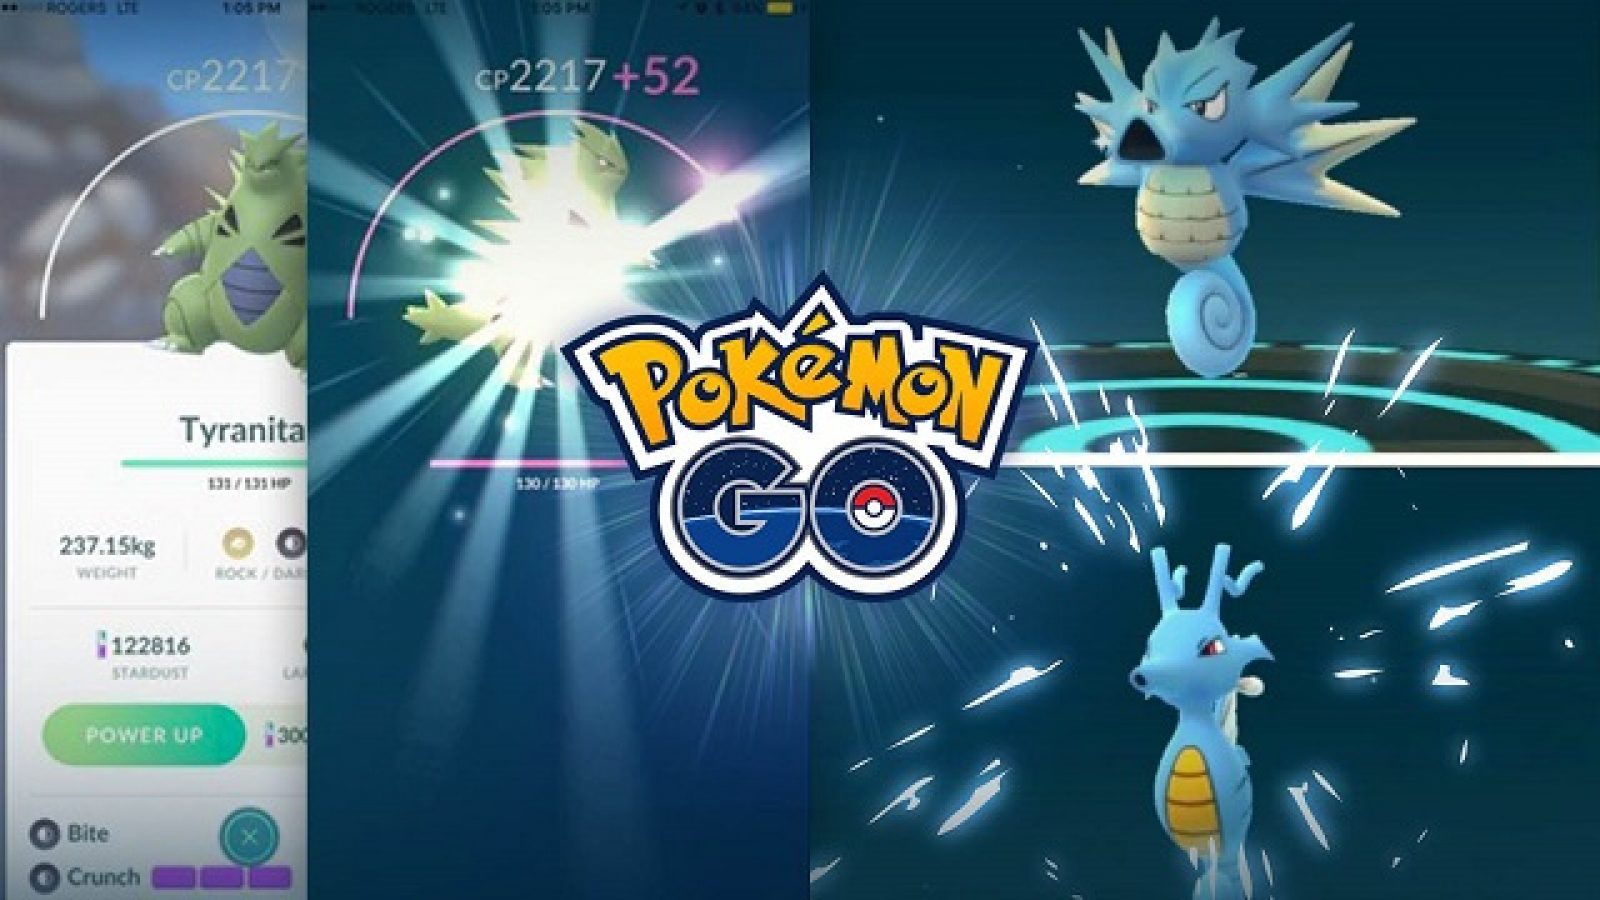 Pokemon Go: Should you Power Up or evolve first?